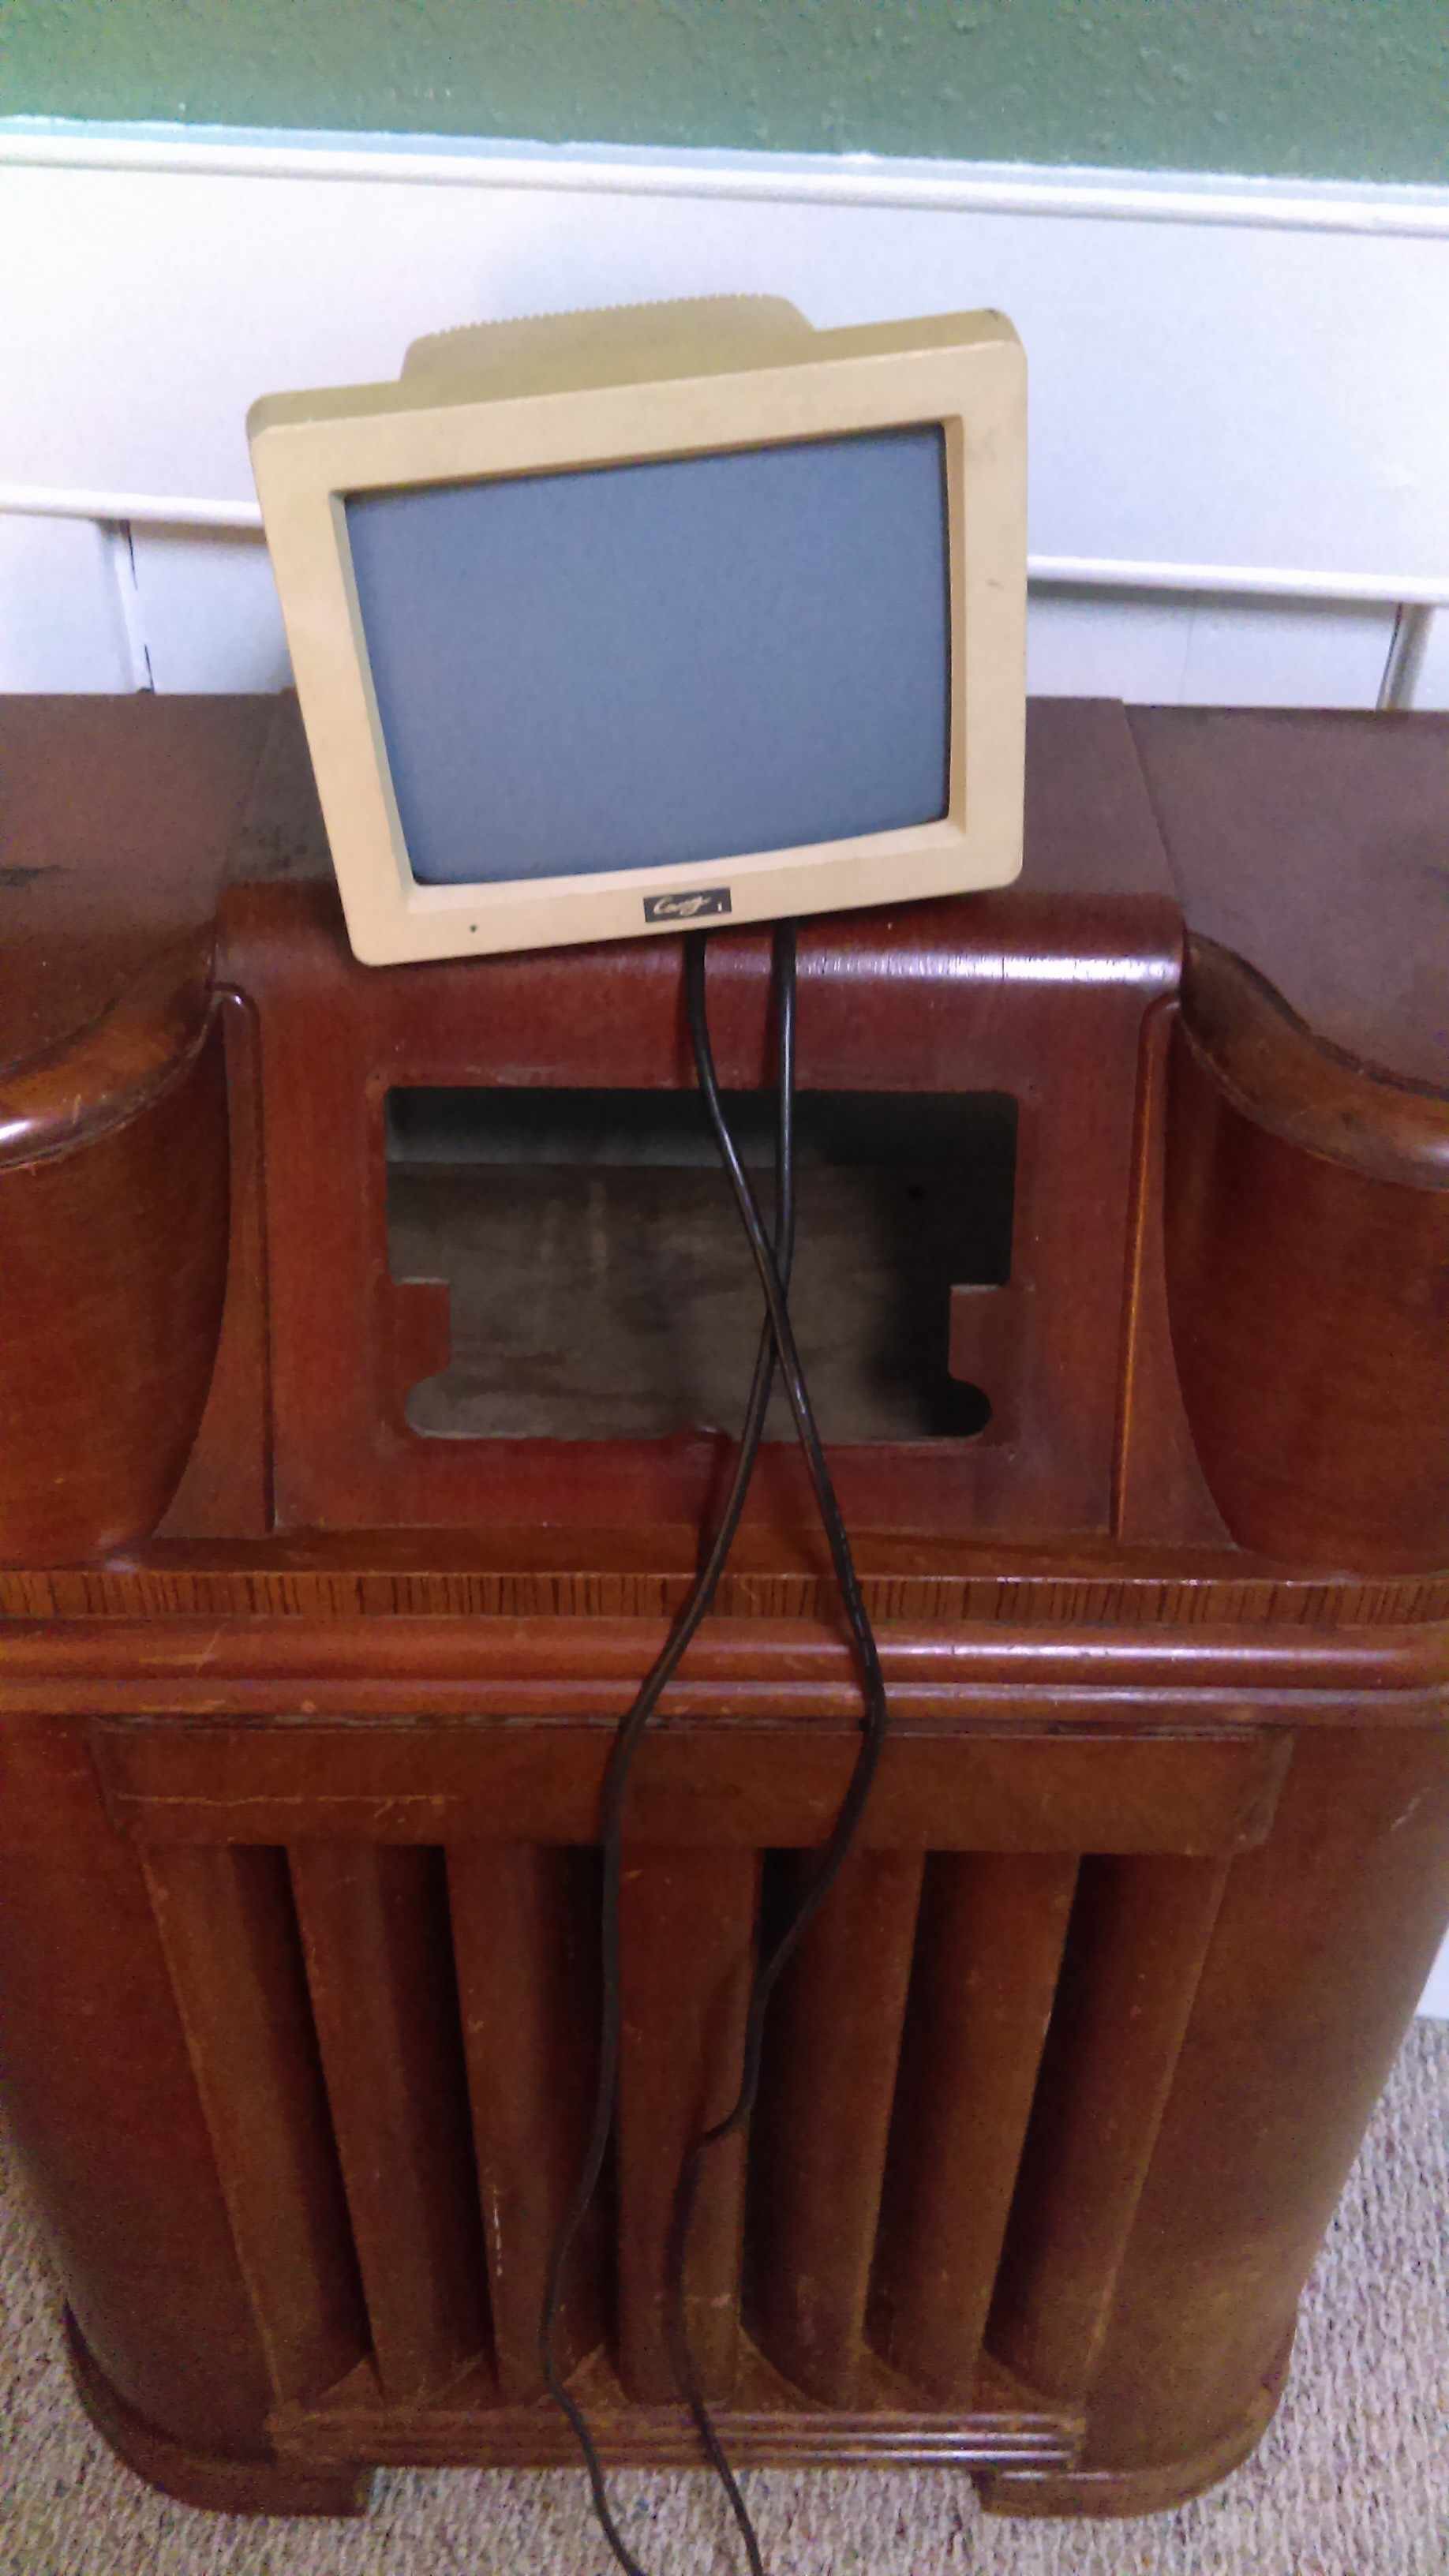 Carry-I computer monitor